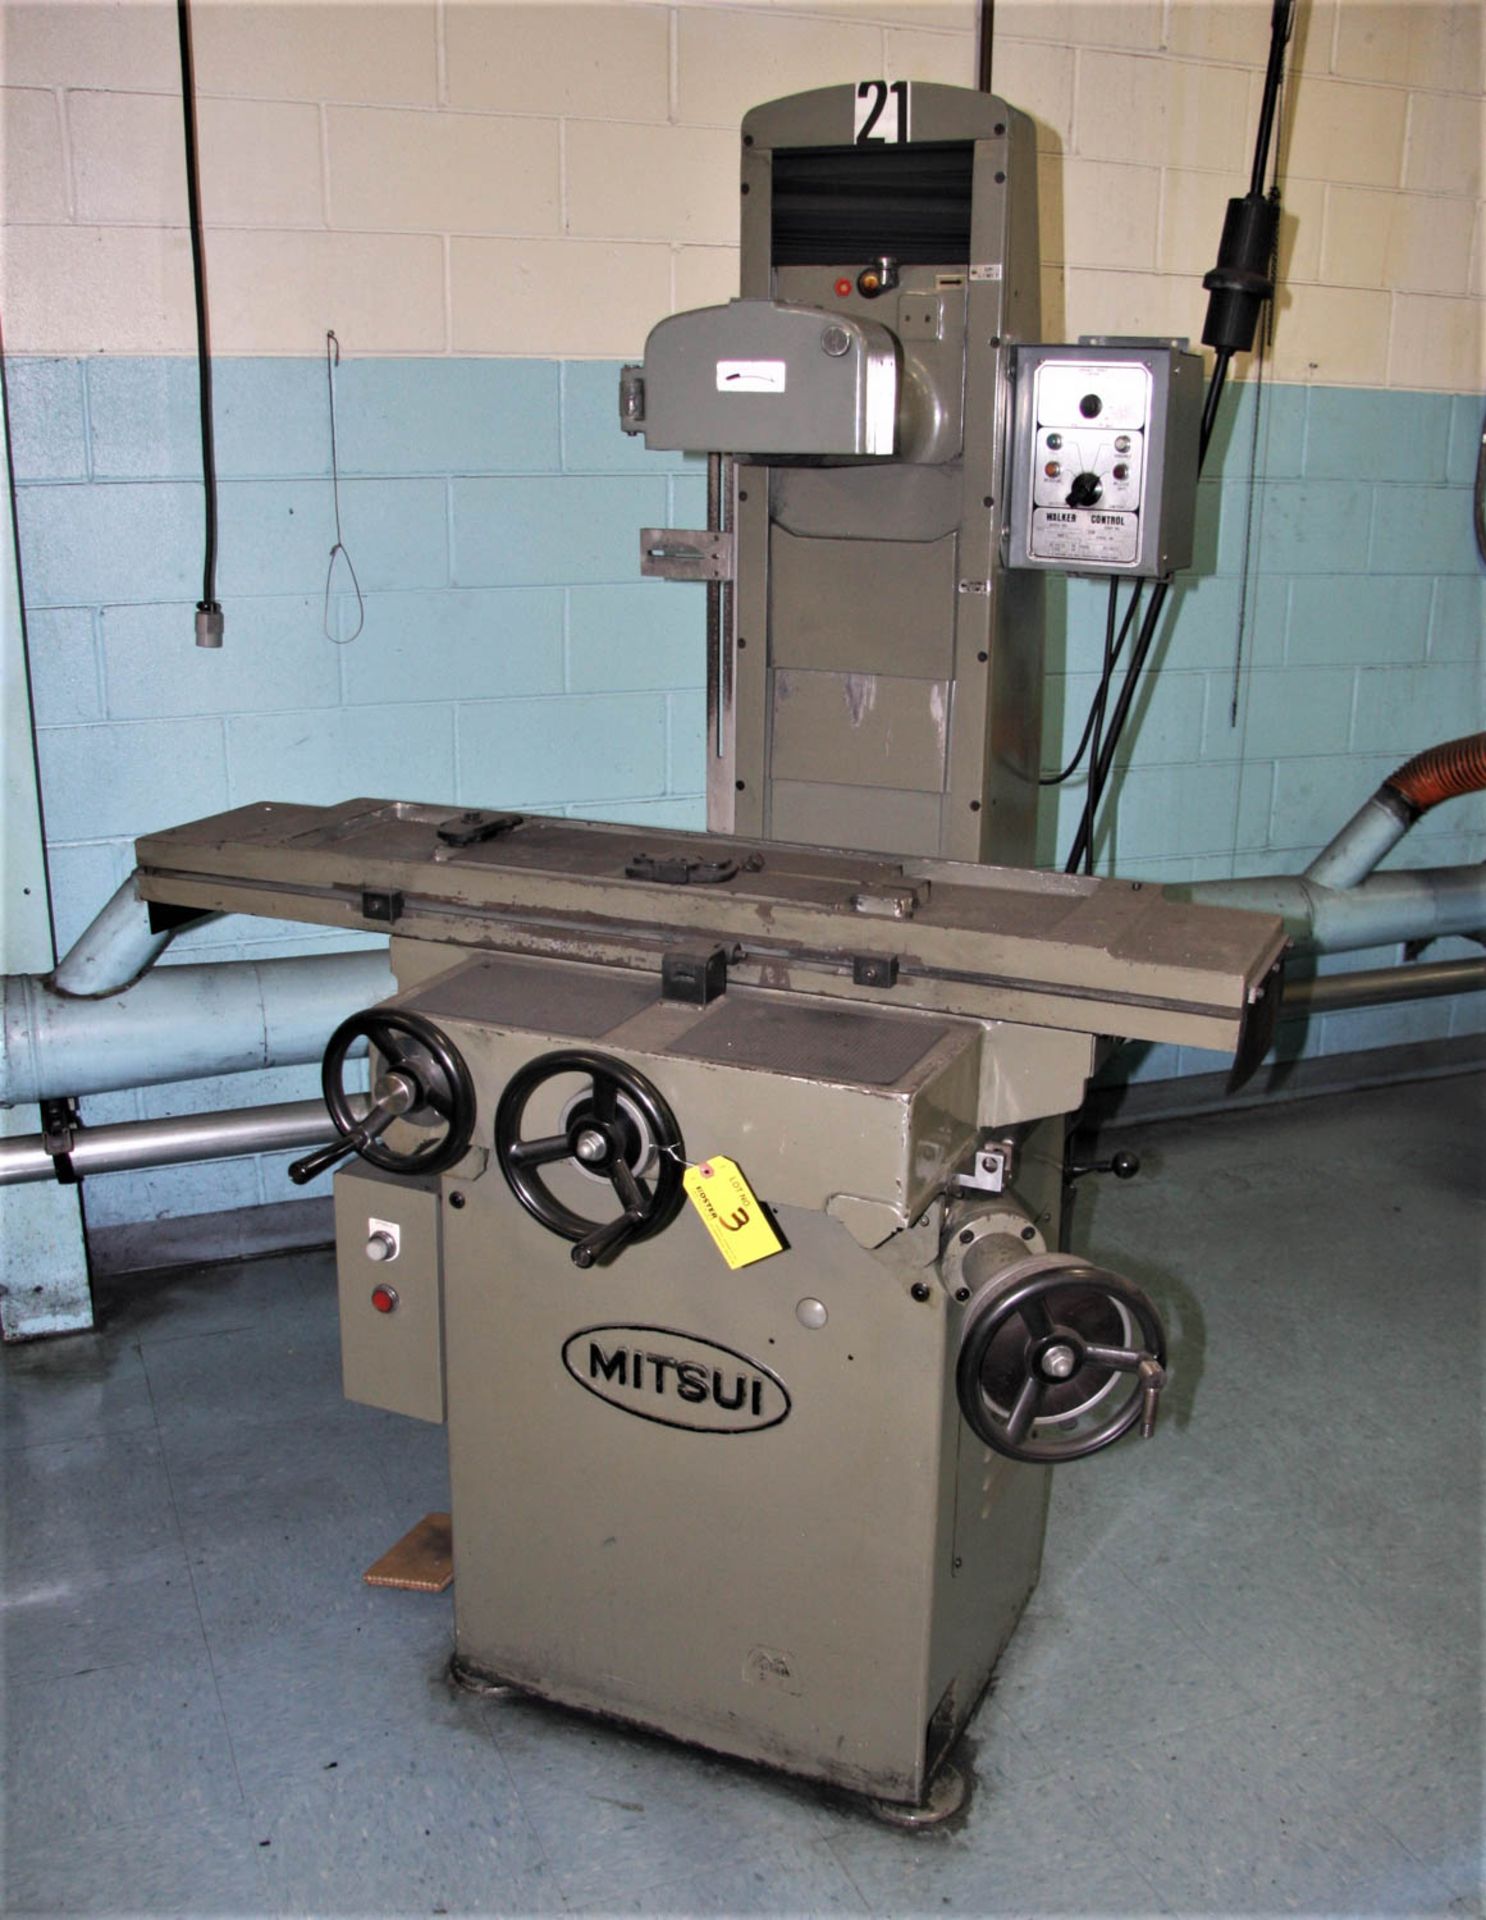 8" X 18" MITSUI MSG-250MH HAND FEED SURFACE GRINDER, 1kw, WALKER CHUCK CONTROL, S/N: 82022540 [#